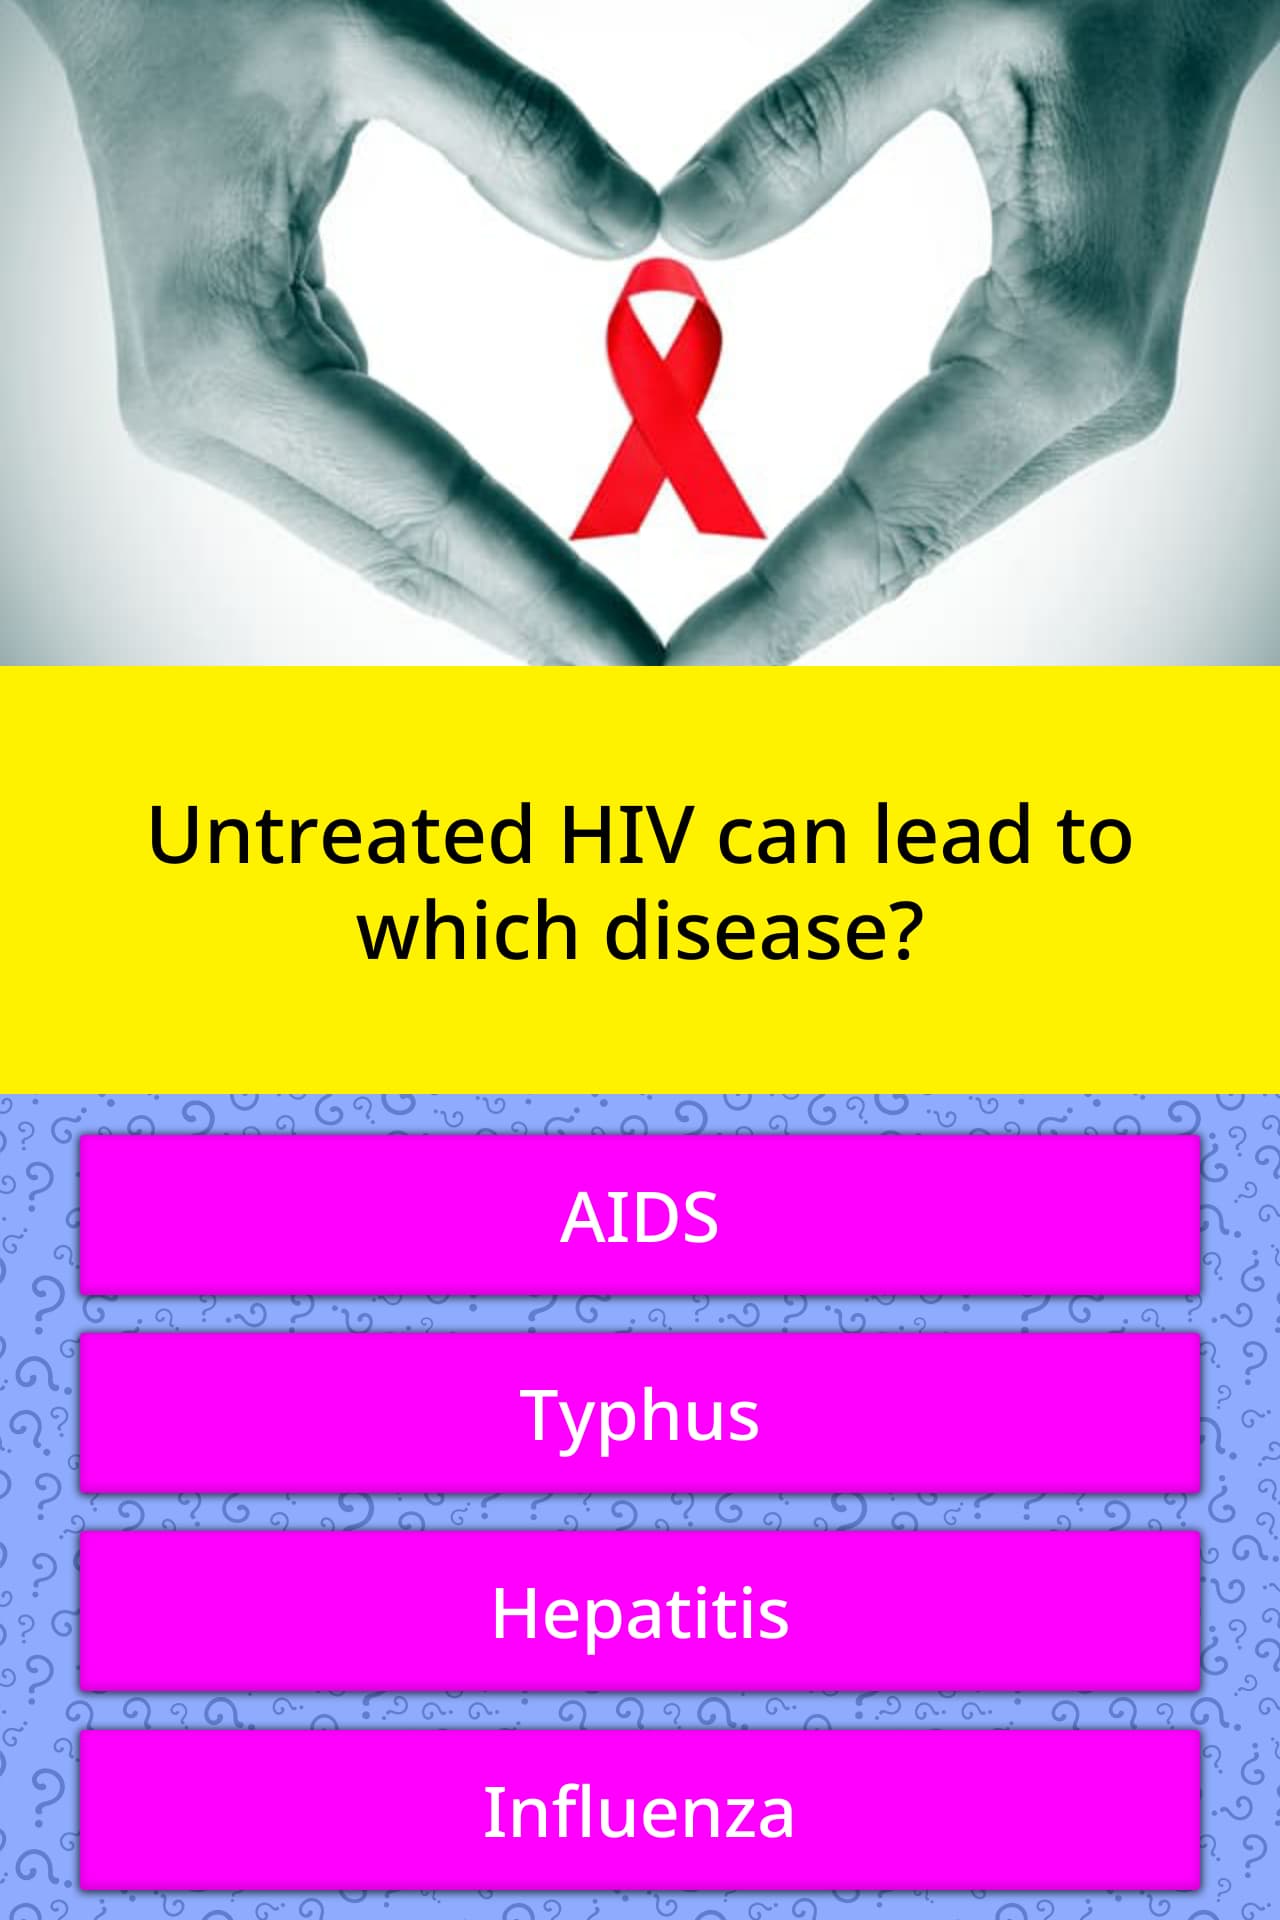 Untreated HIV can lead to which disease?